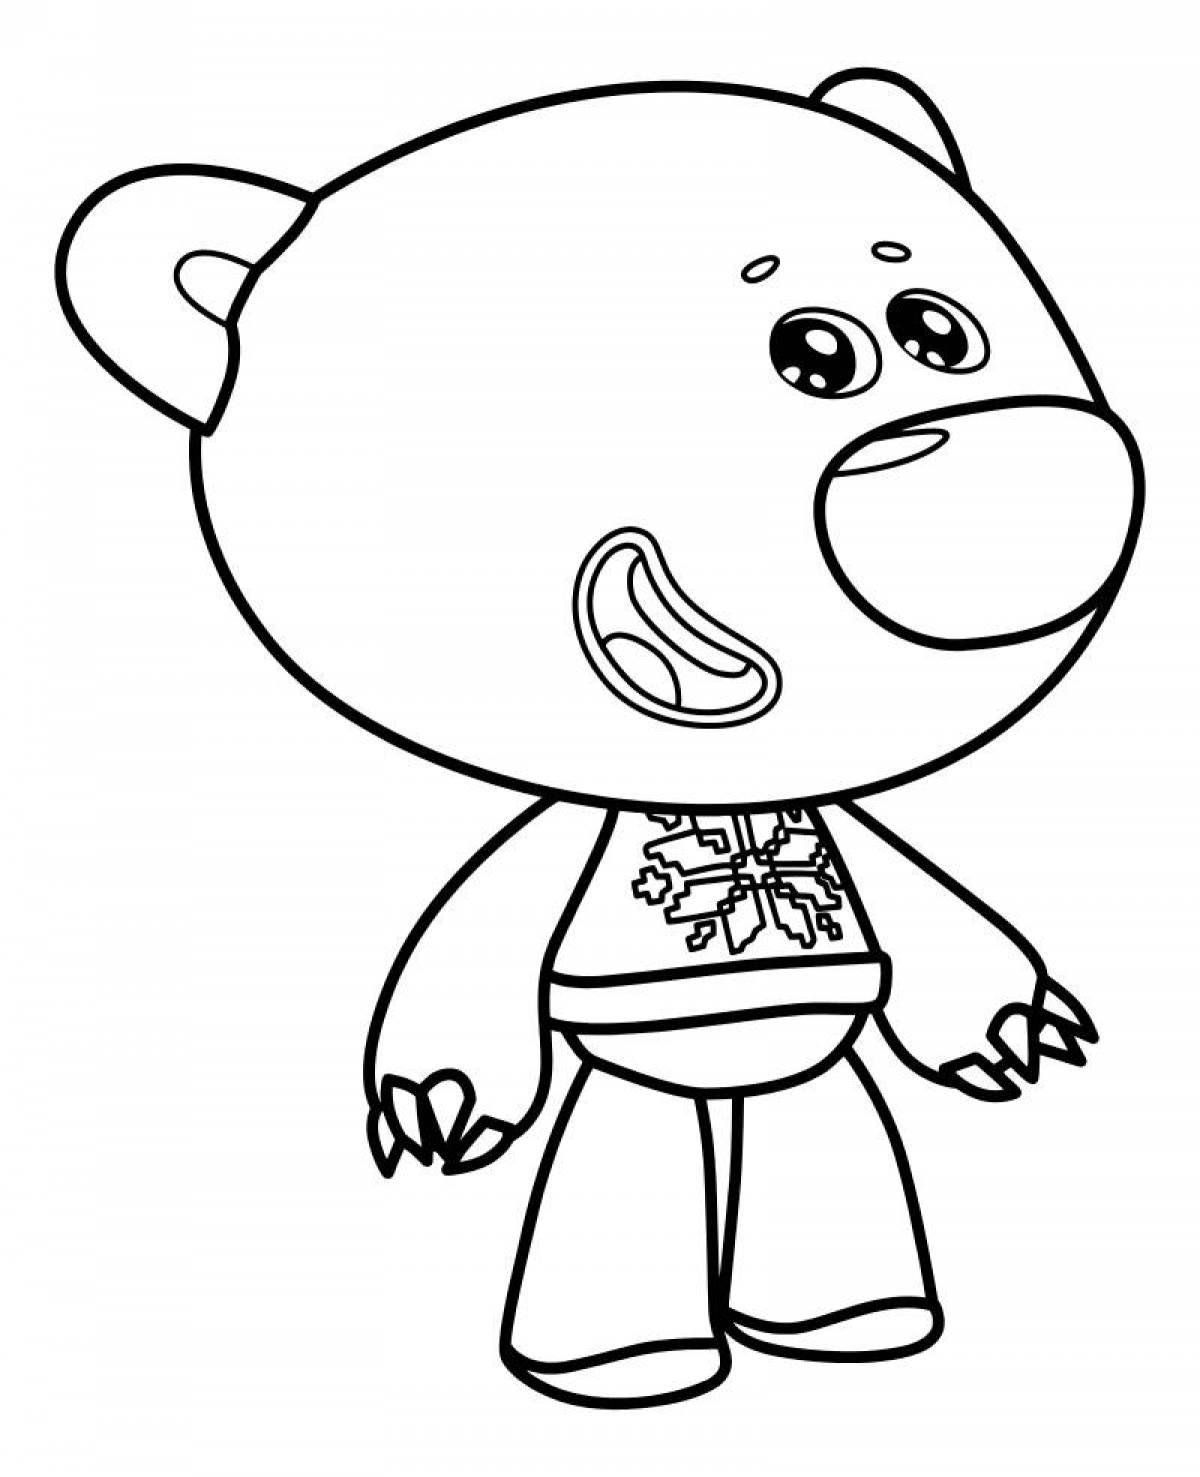 Playful coloring page turn on coloring page with facial expressions